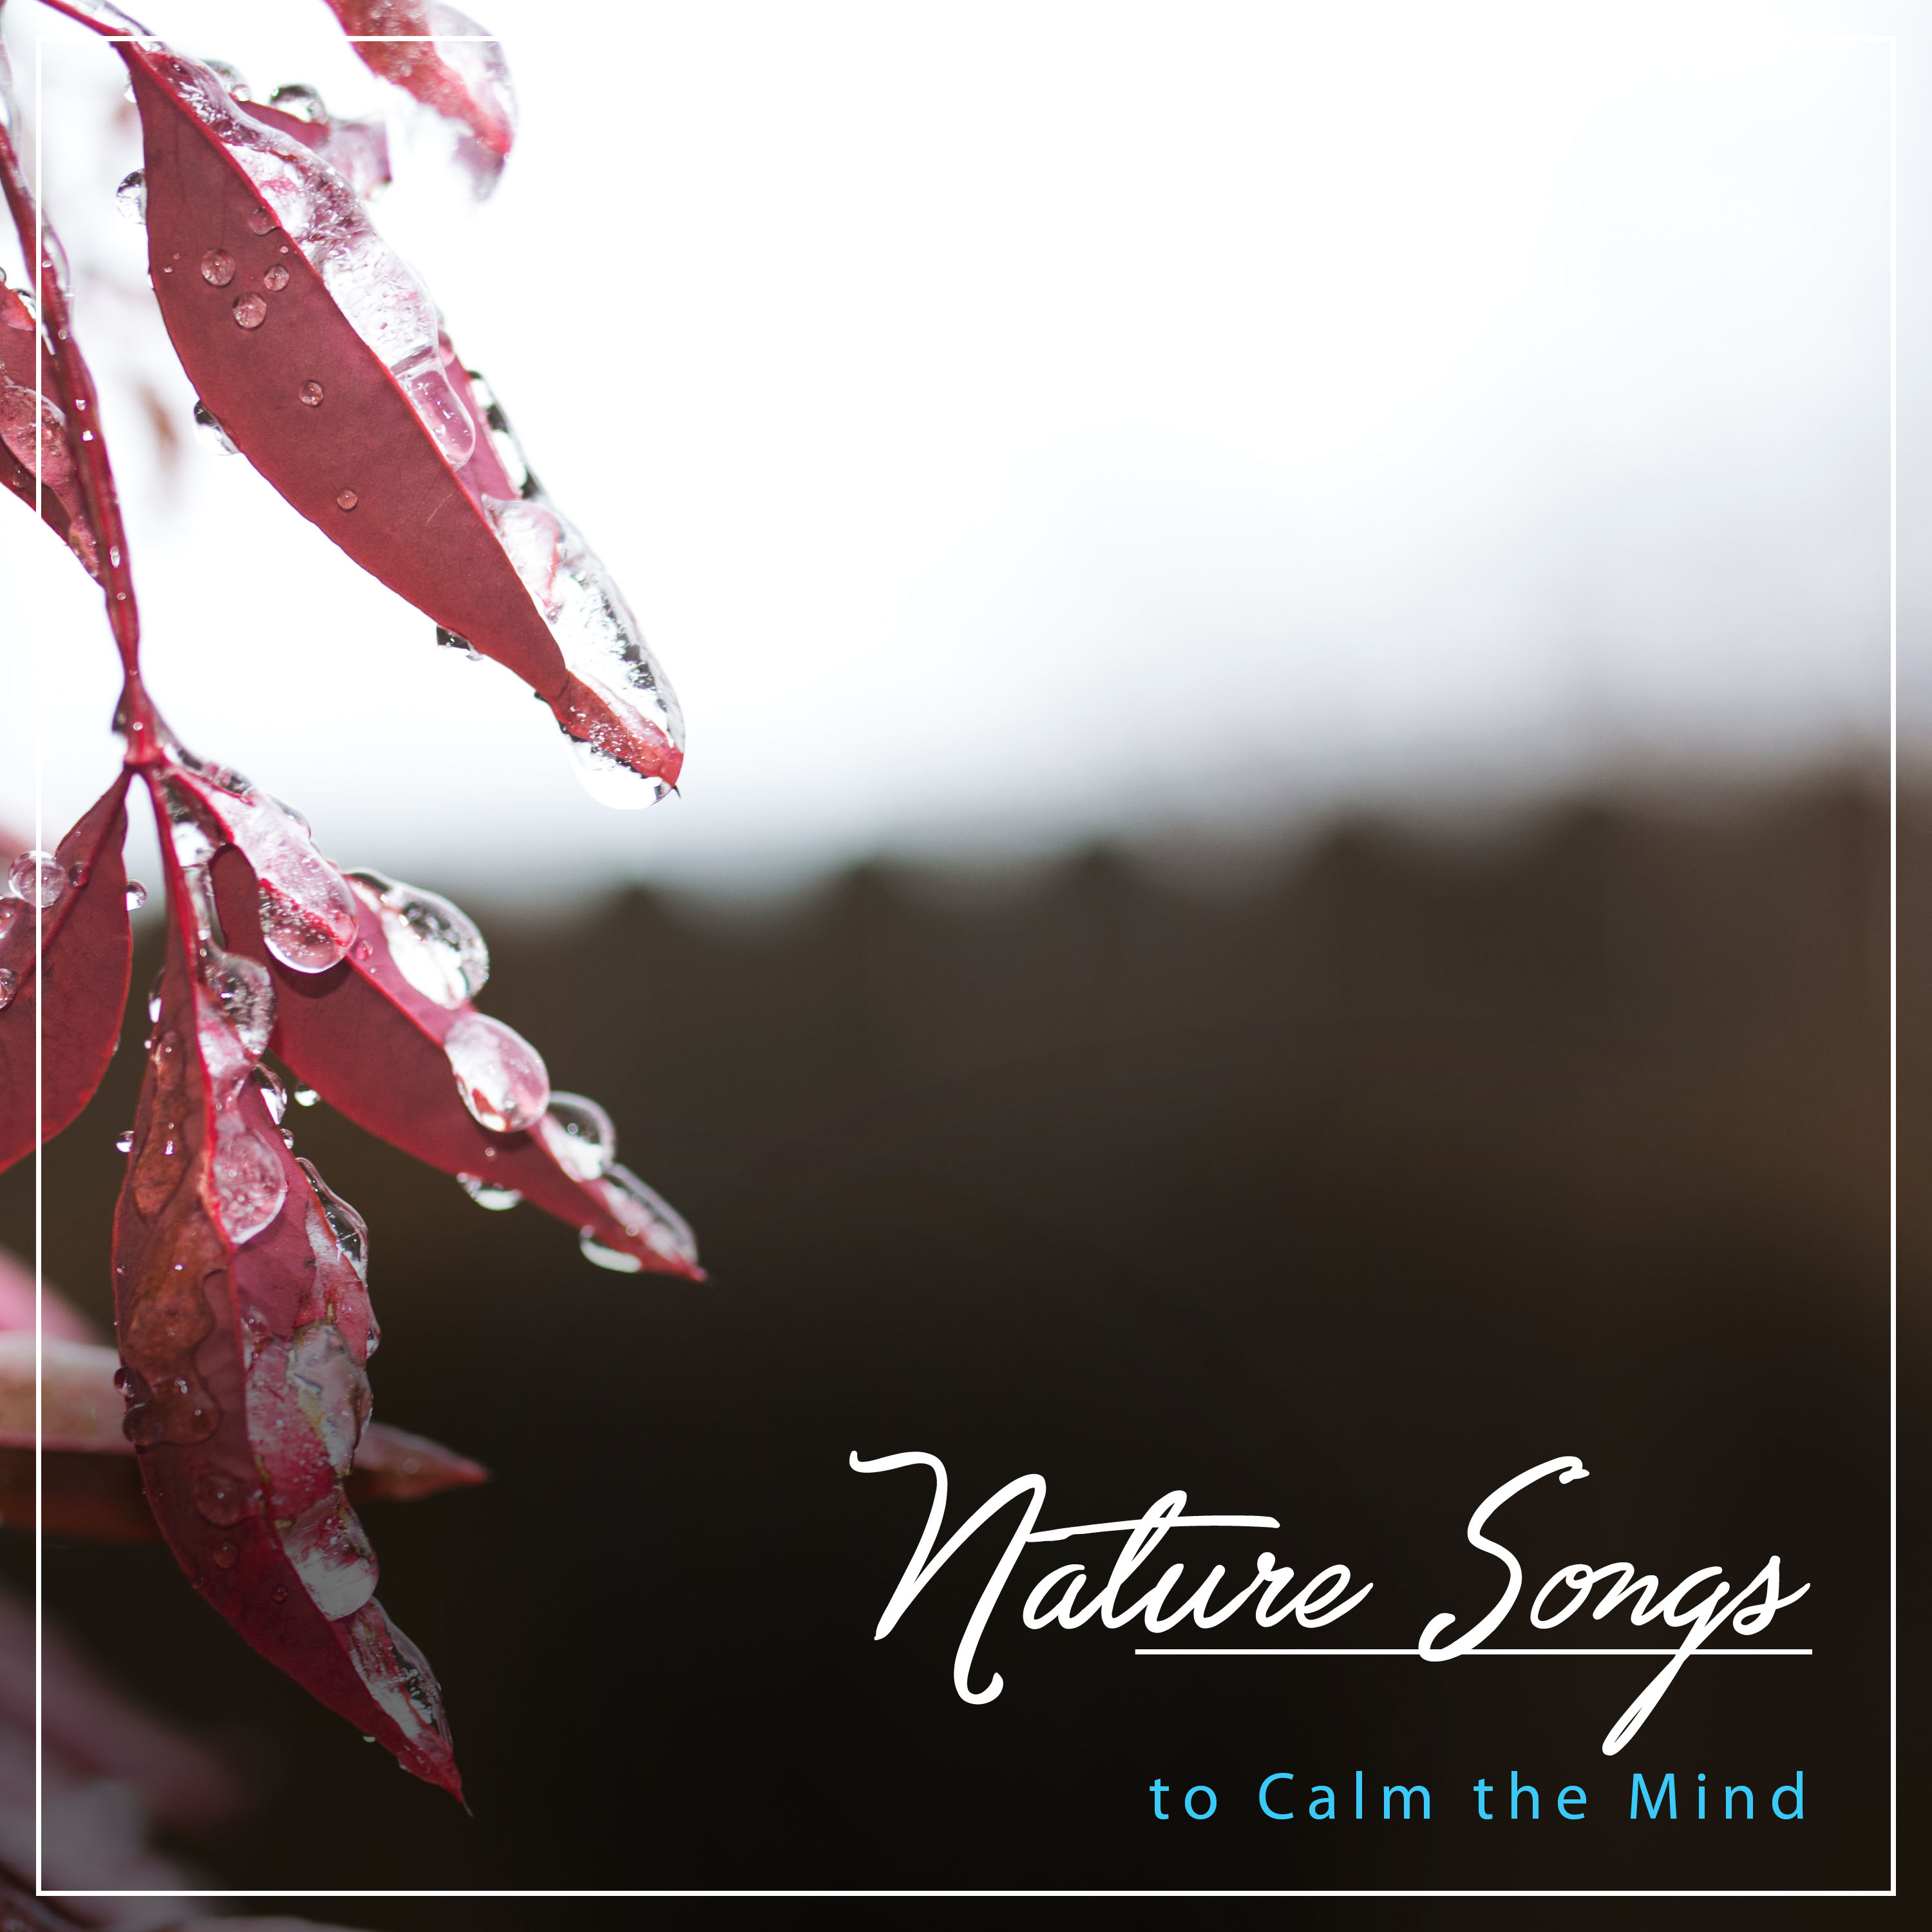 16 Rain and Nature Songs to Calm the Mind